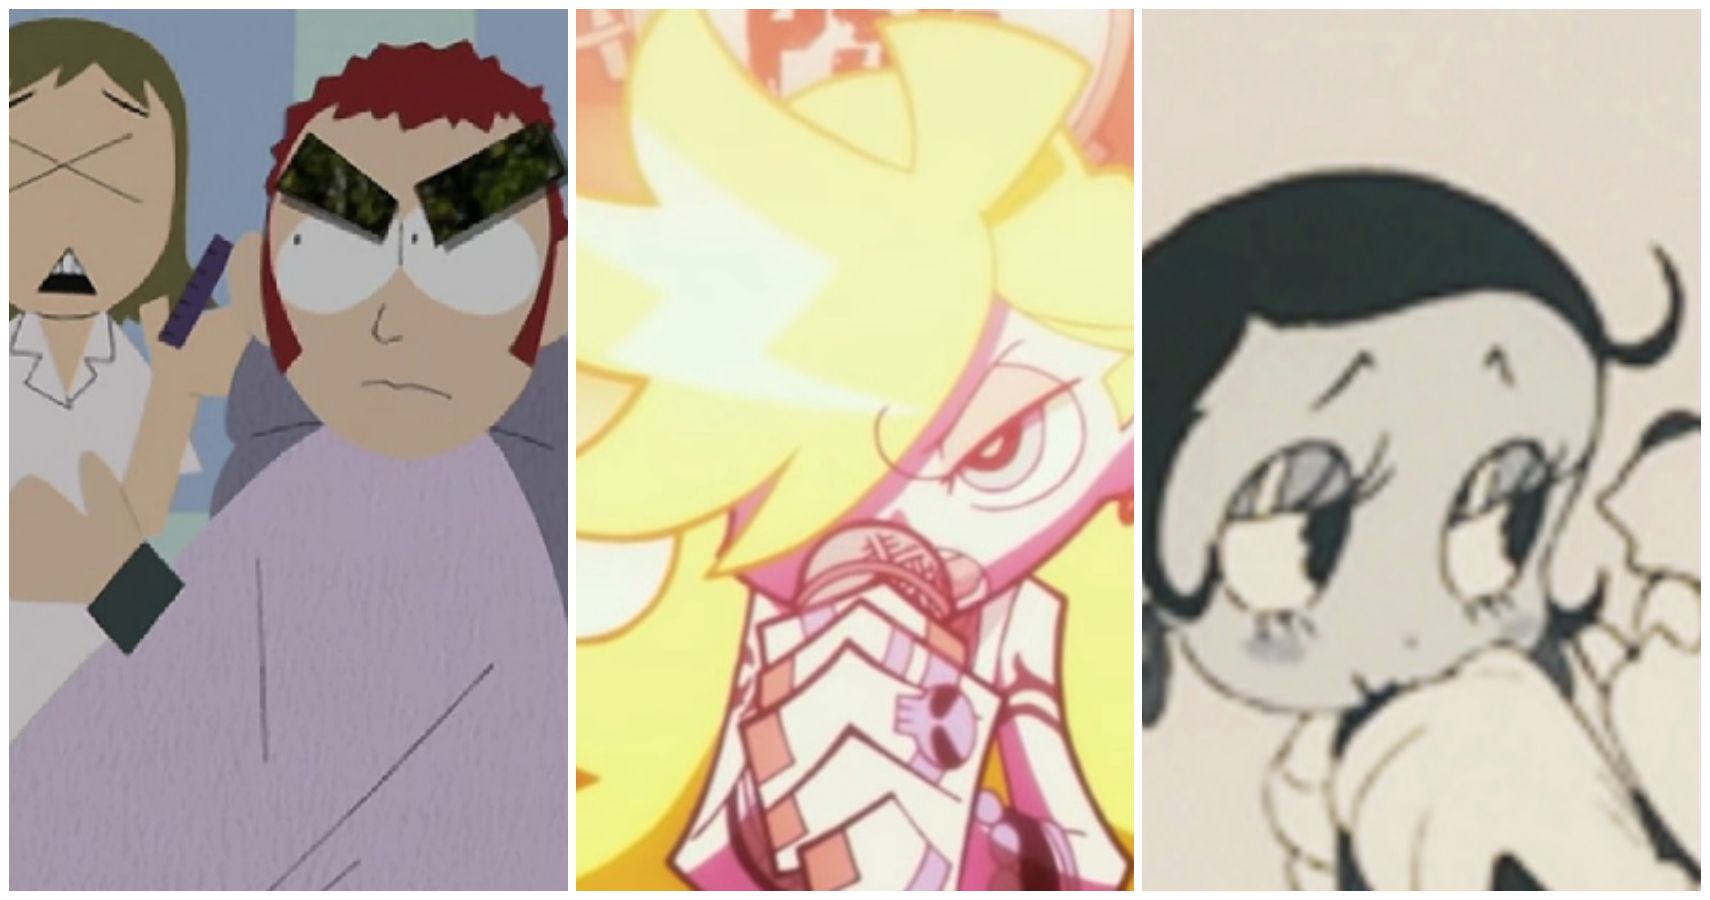 FLCL, Panty & Stocking, & Porco Rosso